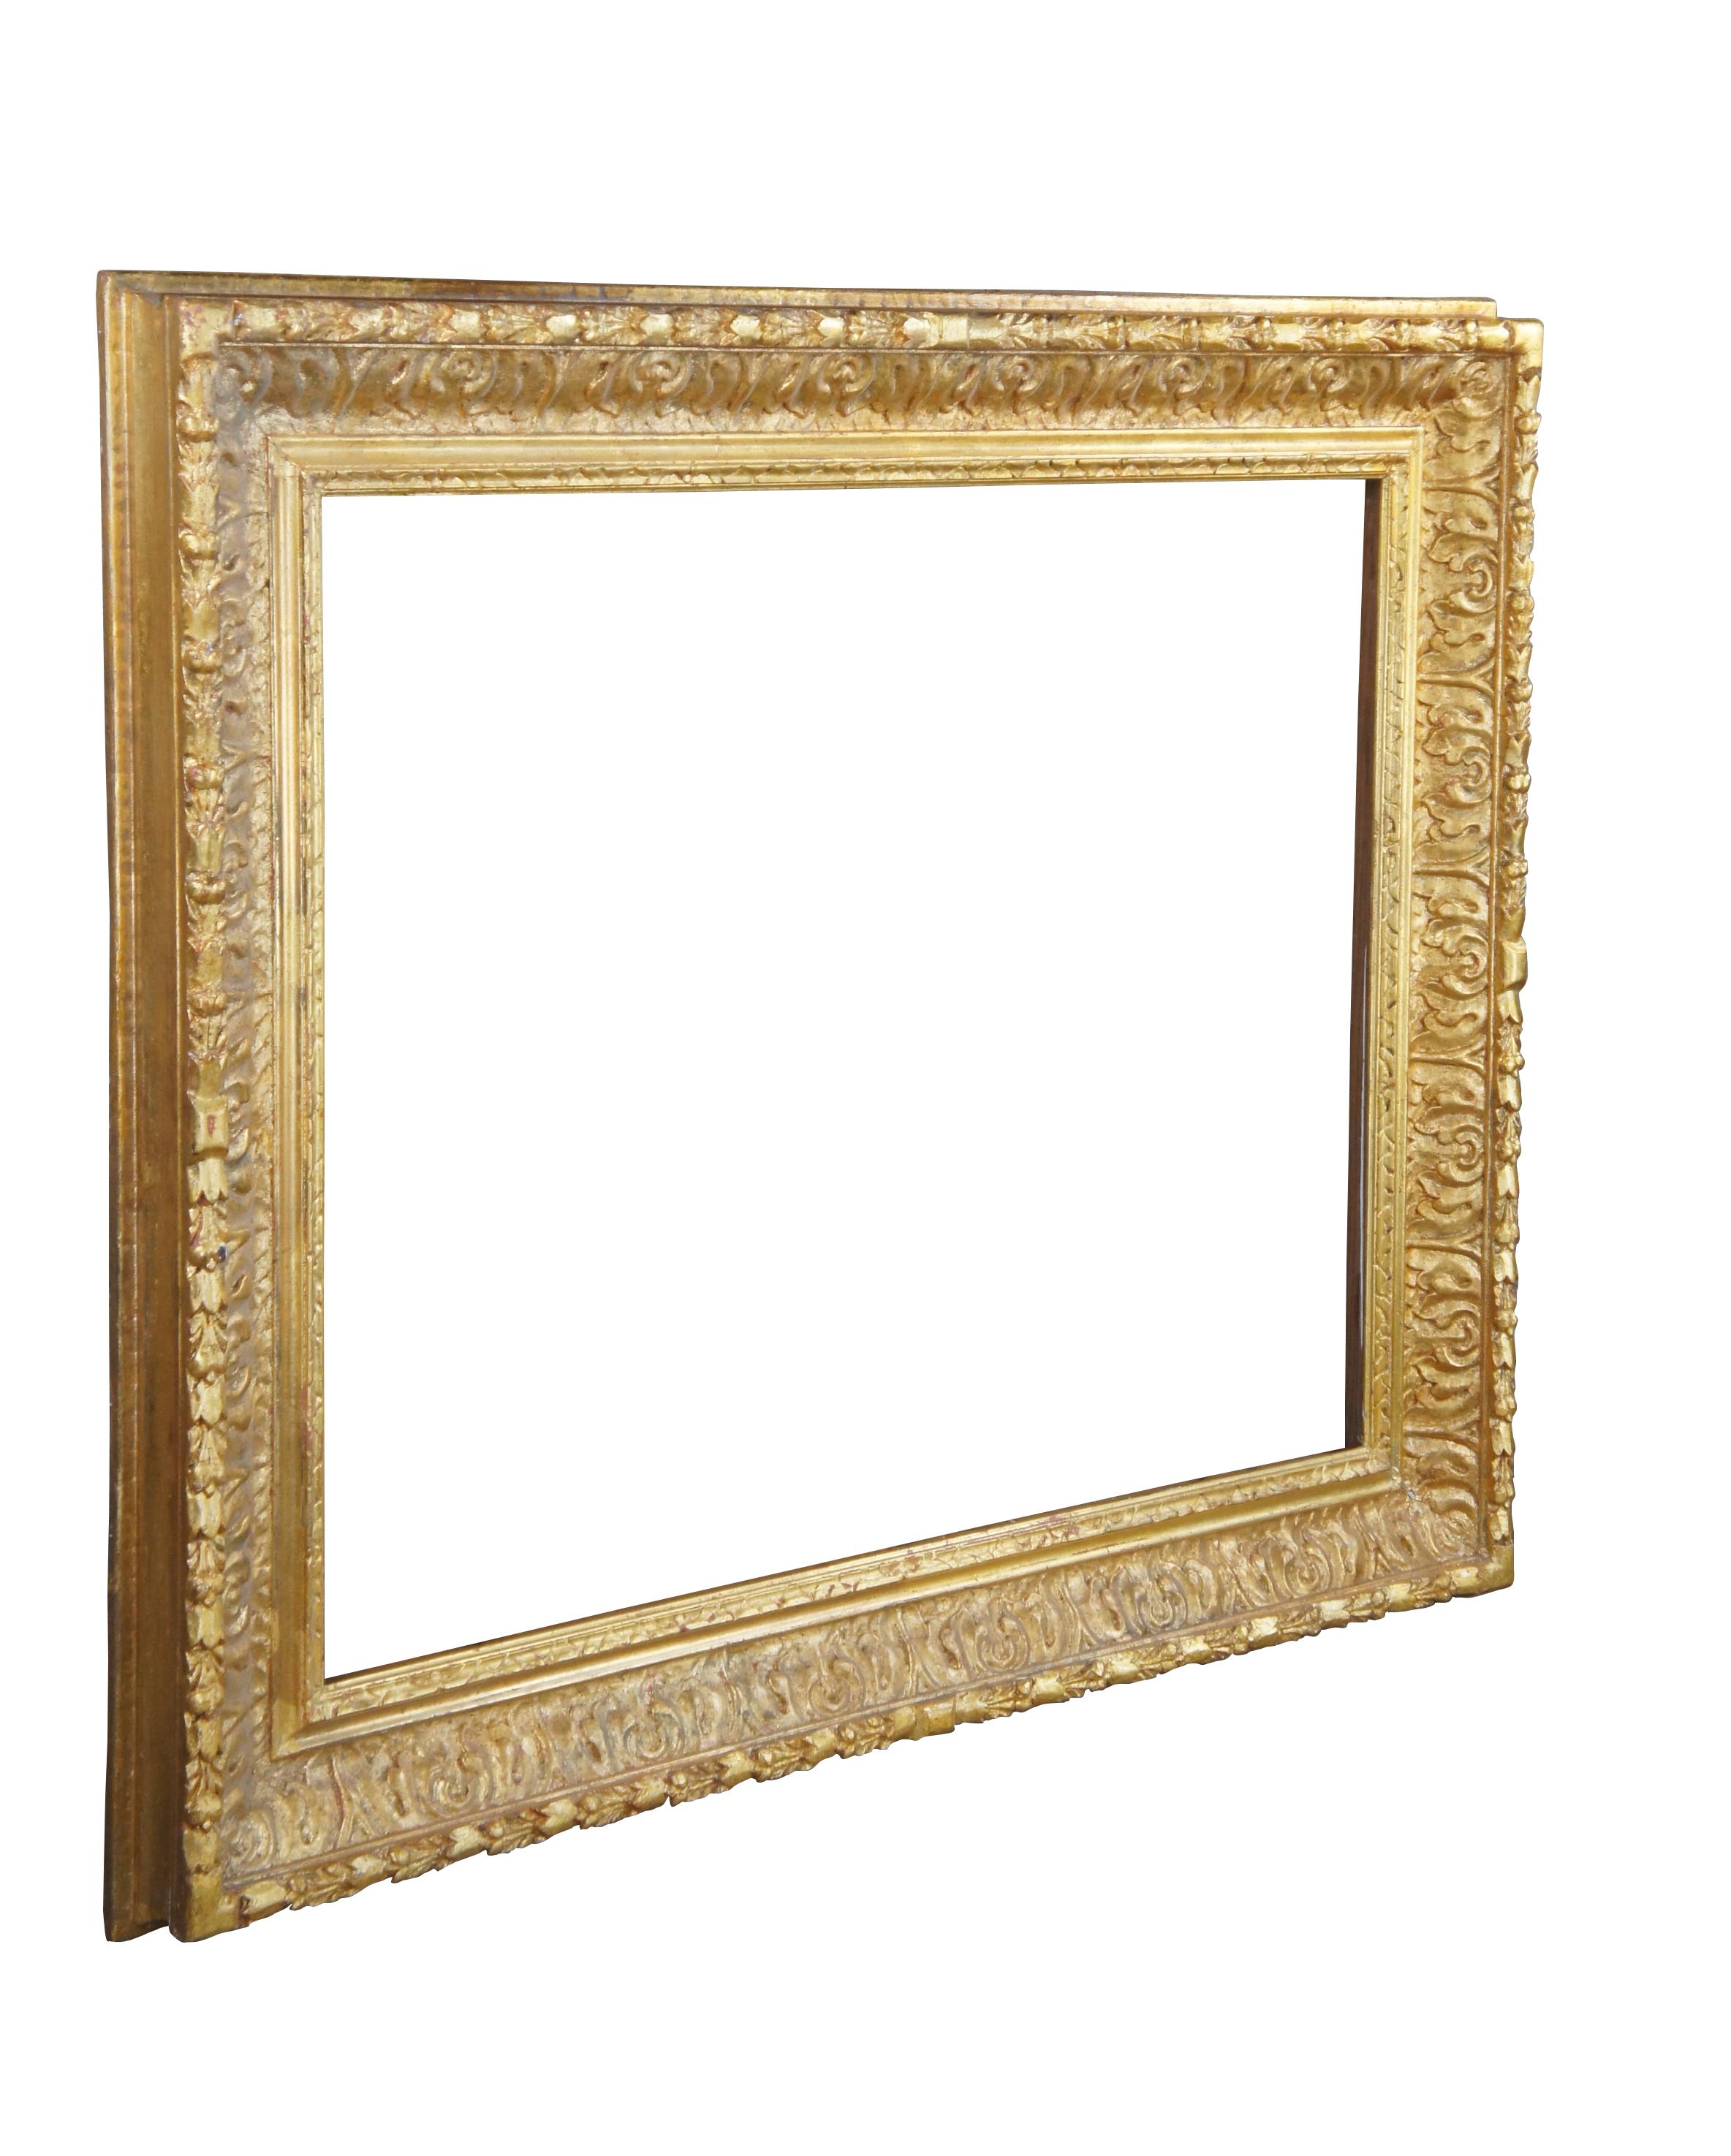 A very large and impressive antique giltwood picture / artwork / mirror frame featuring vibrant gold gilt acanthus design.  Accomodates artwork or mirror size 41